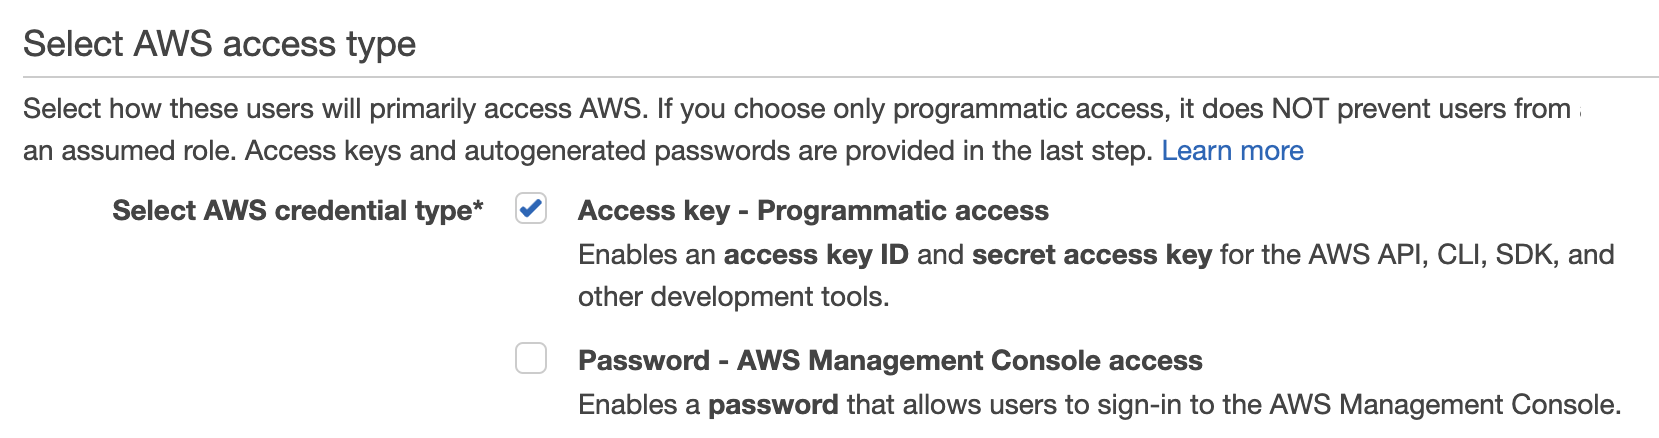 Screenshot
    of selecting an AWS credential type with two options: Access Key - Programmatic
    access and Password - AWS Management Console access